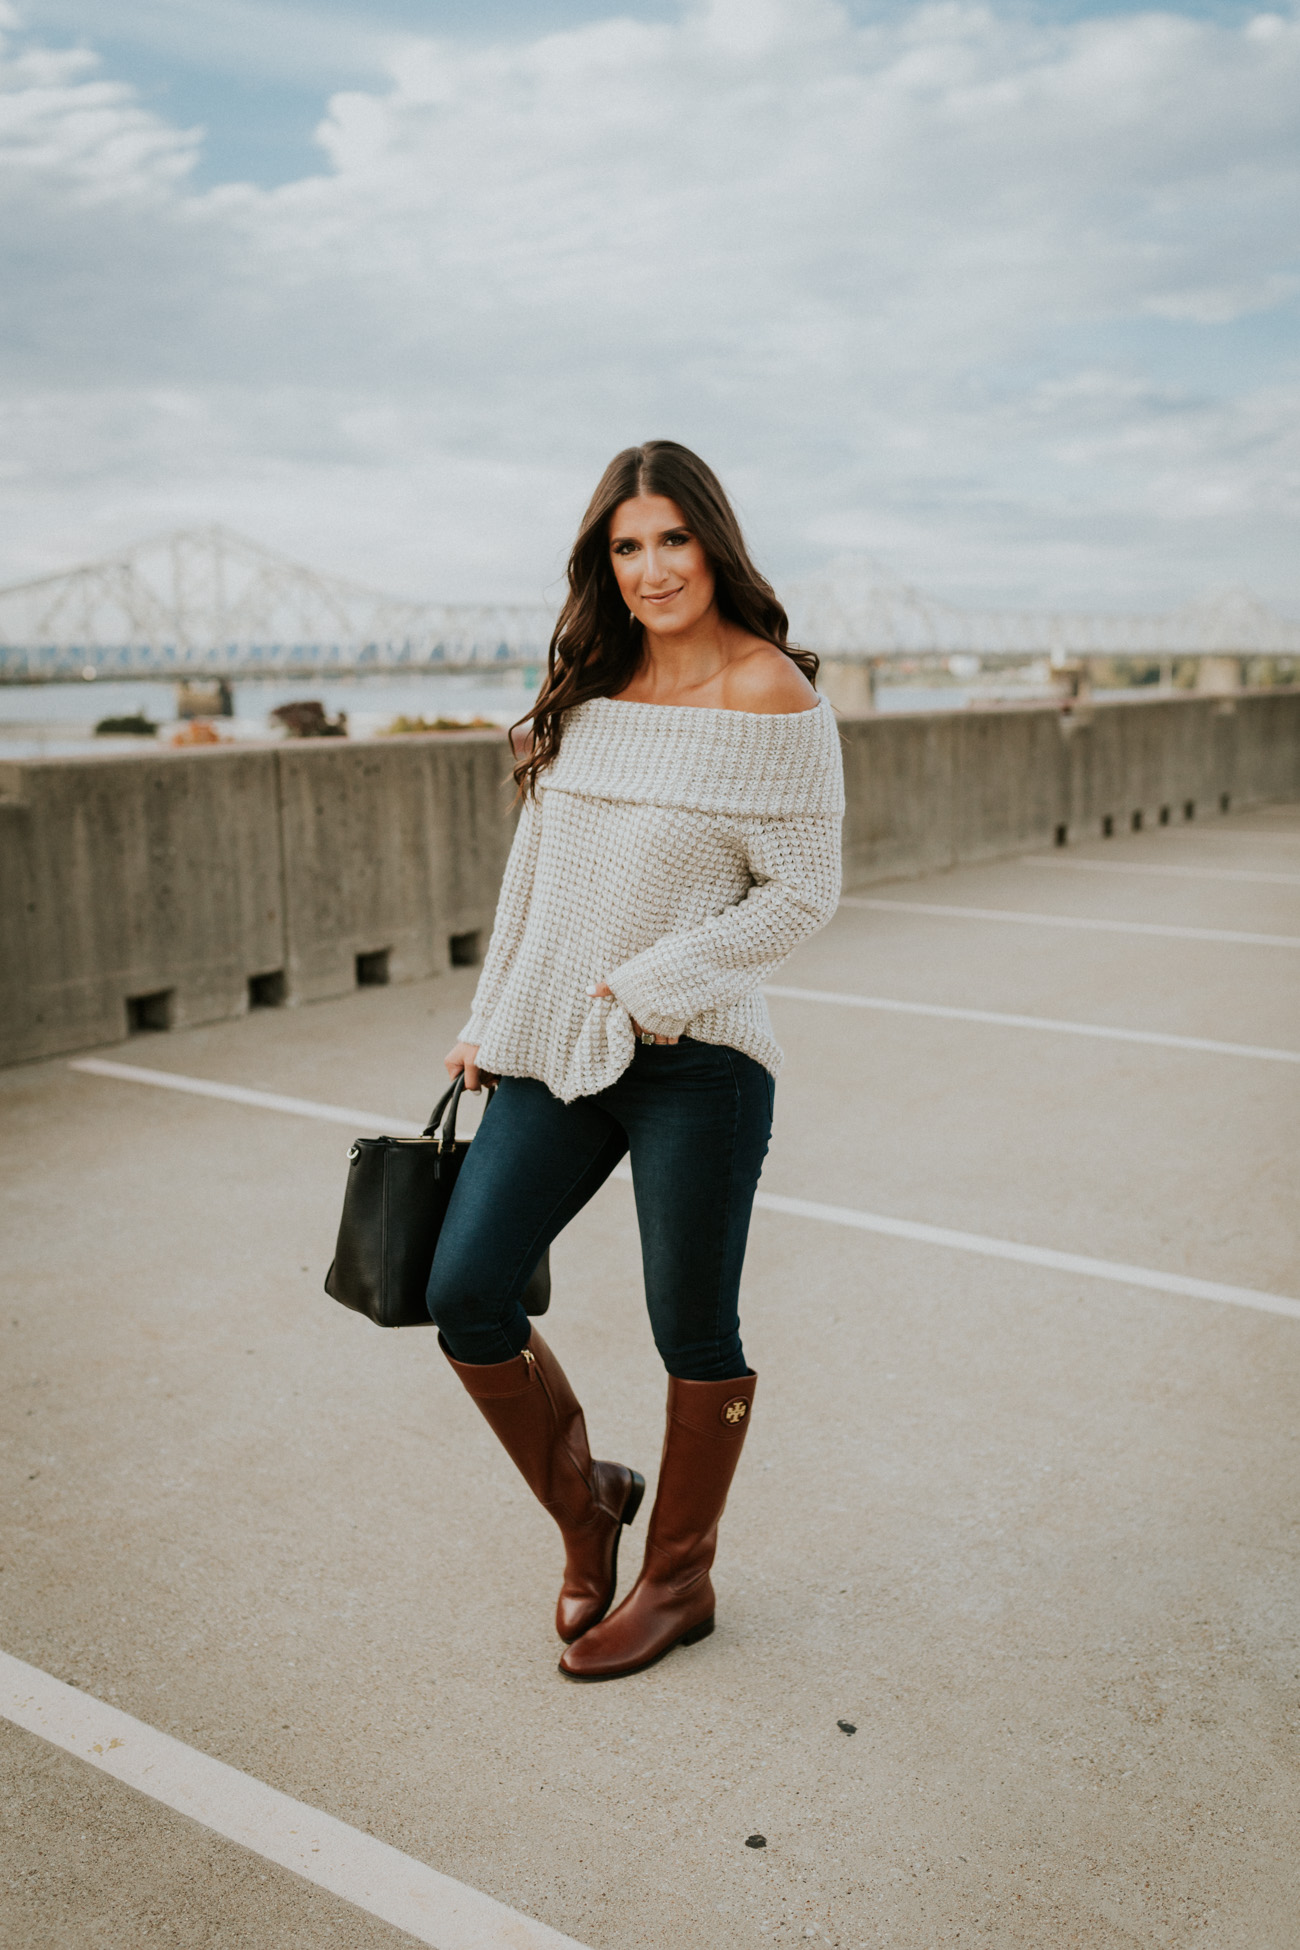 fall riding boots, off the shoulder sweater, cozy sweater, cozy fall sweaters, bb dakota sweaters, tory burch riding boots, tory burch boots, tory burch satchel, fall style, buffalo plaid shirt, fall fashion, fall outfit ideas, couple outfits, fall couples outfit, fall couple outfits // grace wainwright a southern drawl